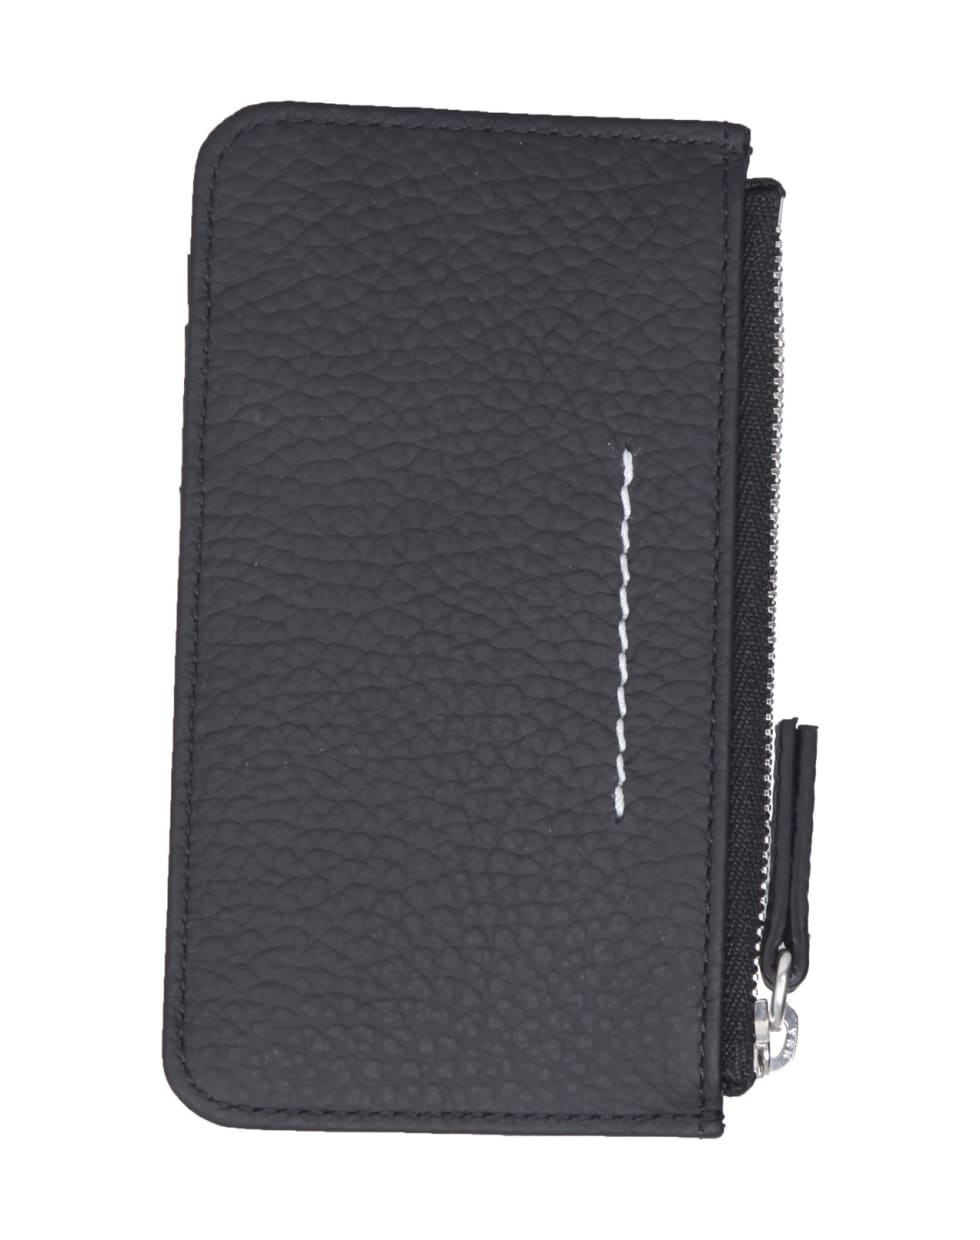 MM6 Maison Margiela Small Card Holder With Zip - NERO